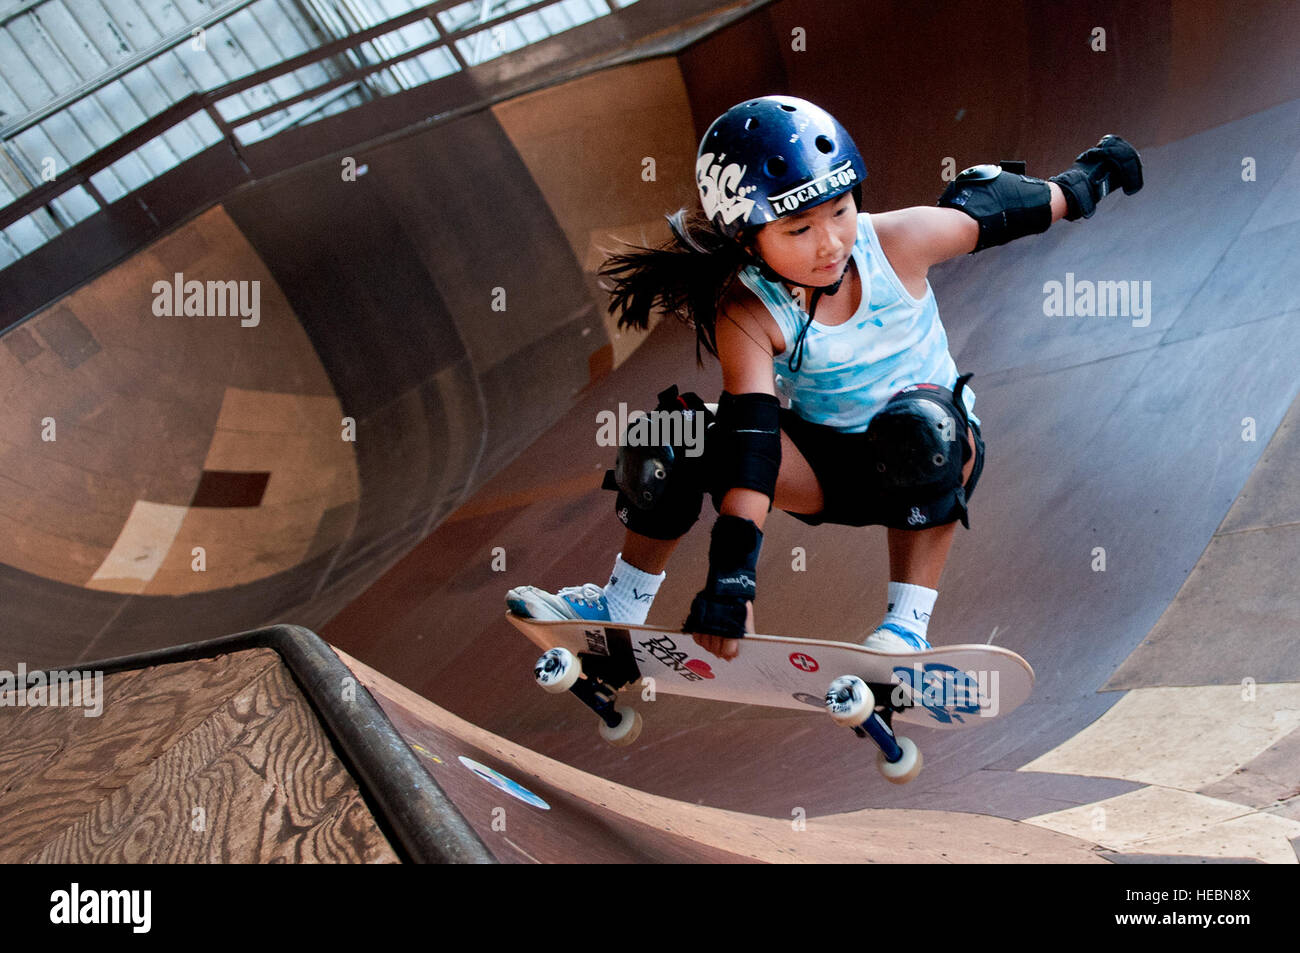 Skate Ramps High Resolution Stock Photography and Images - Alamy